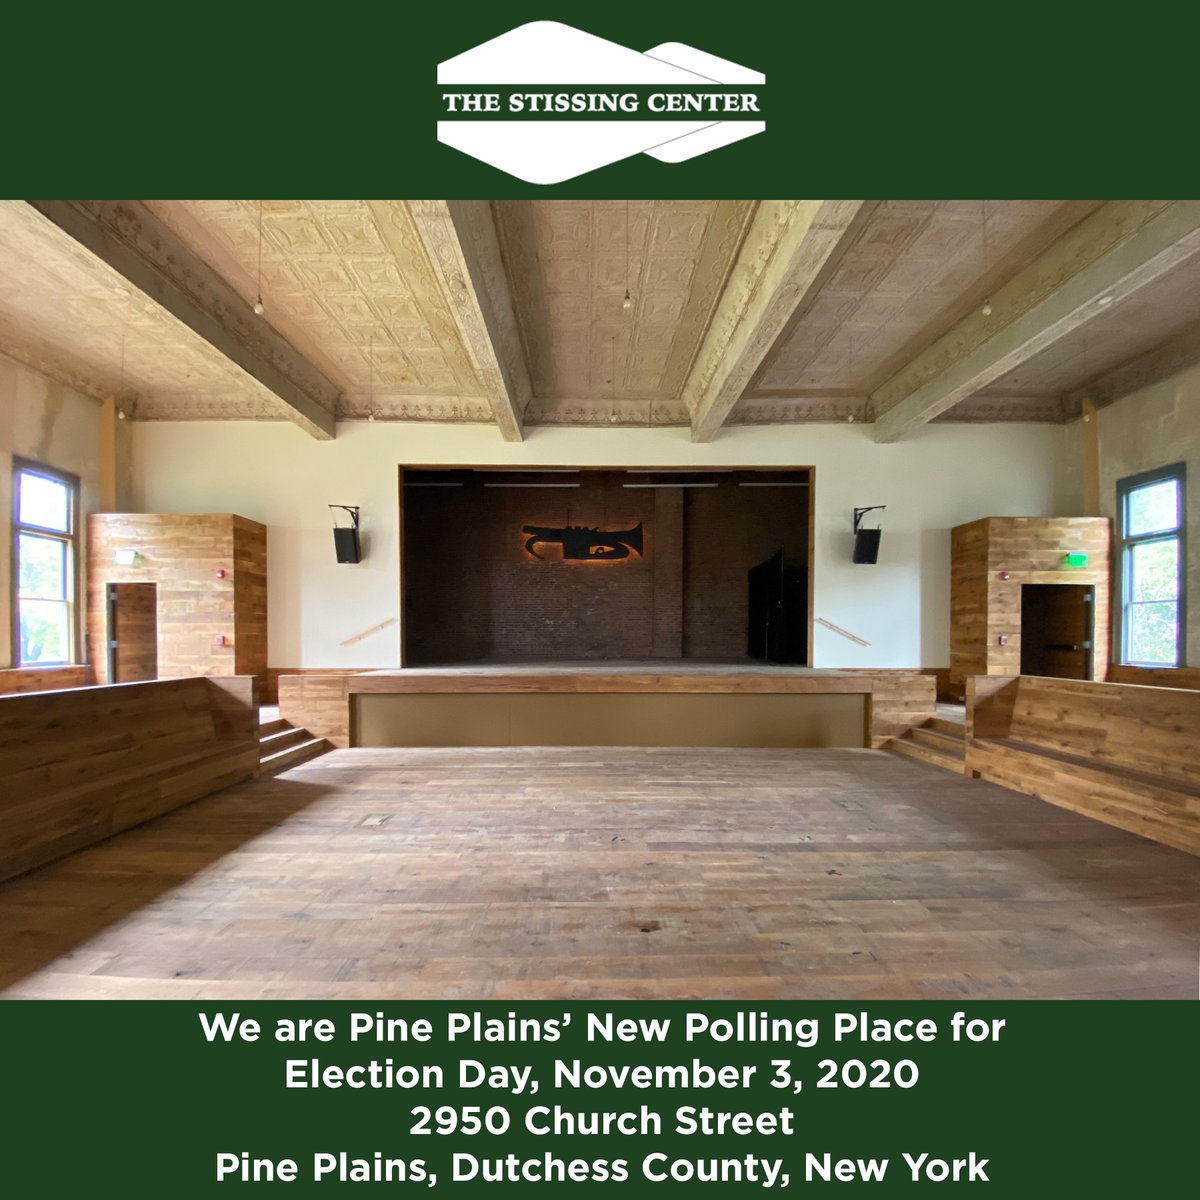 PINE PLAINS - VOTE HERE. 

The Stissing Center is Pine Plains' polling location for Election Day, November 3. It's moved from the smaller Town Hall to The Stissing Center. 

2950 Church St., Pine Plains, Dutchess County, New York